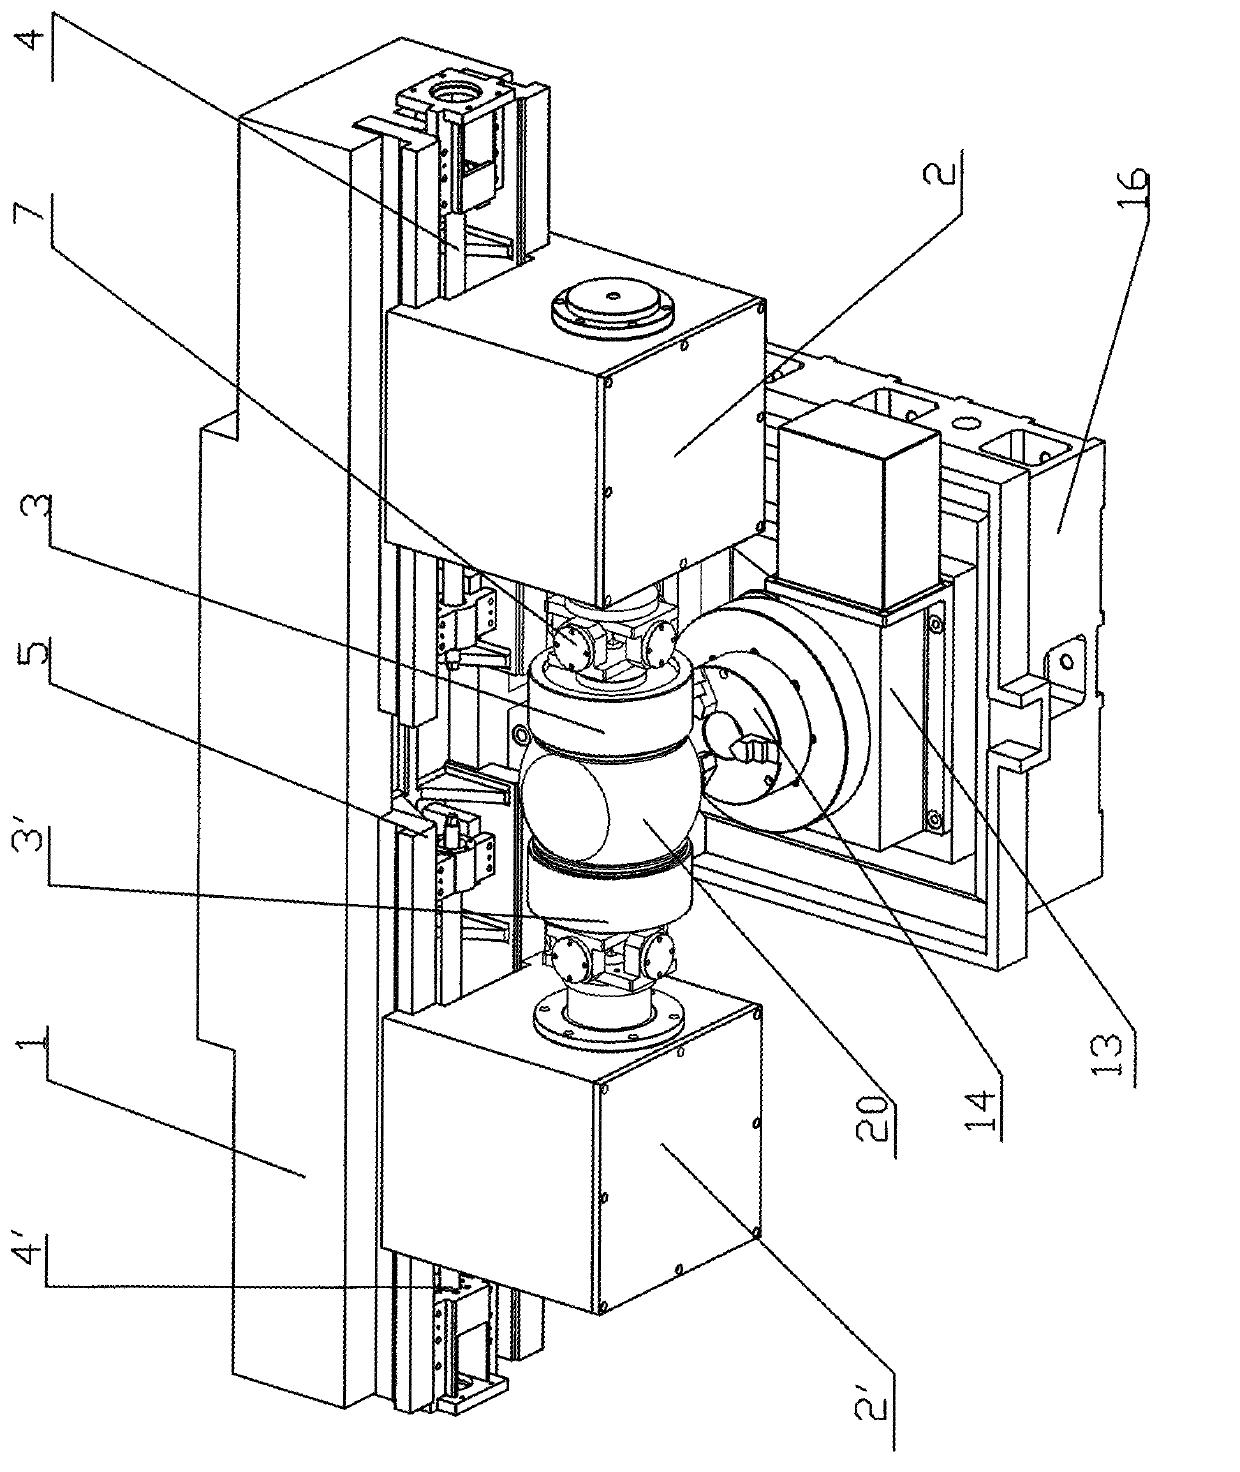 Machine tool for running-in process of ball and valve seat of ball valve